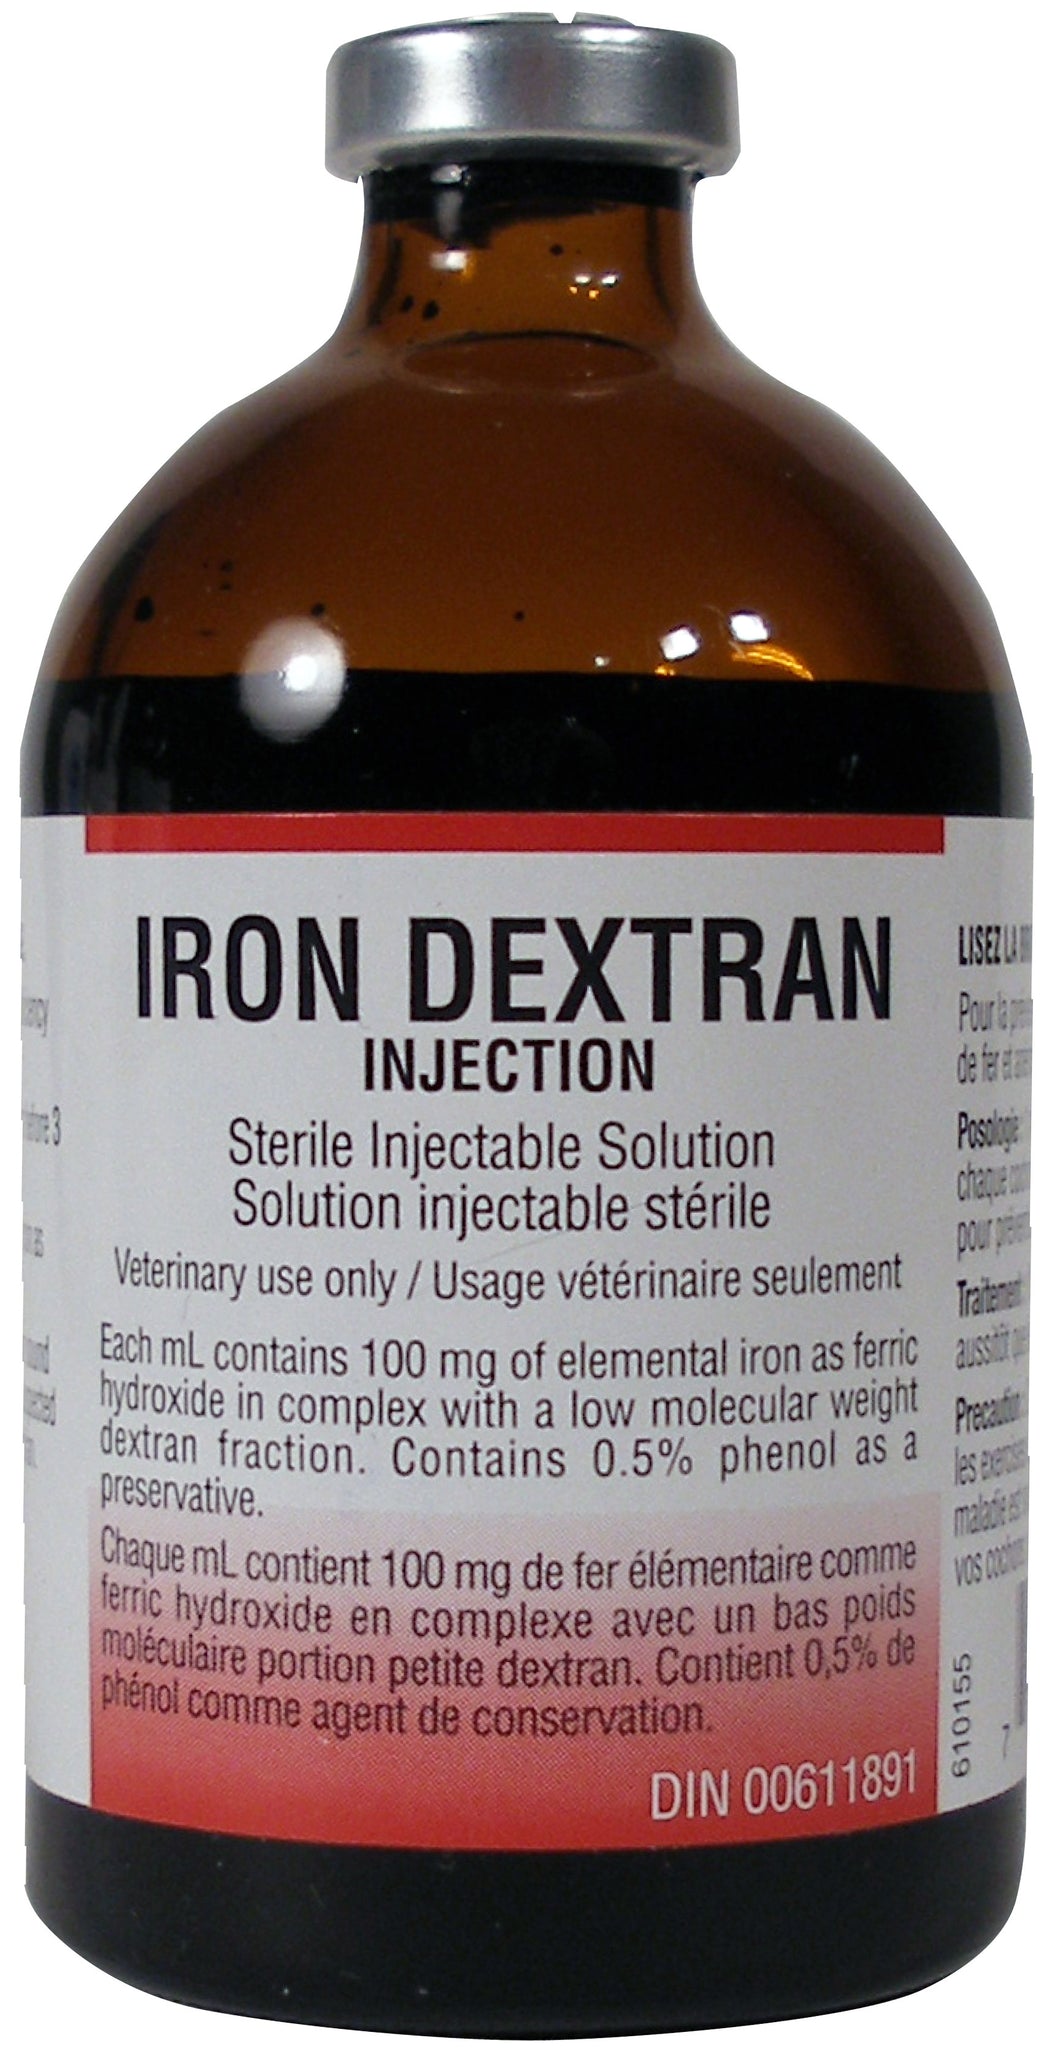 IRON DEXTRAN (100 ML) DVL Prevention and treatment of iron deficiency anemia in baby pigs.